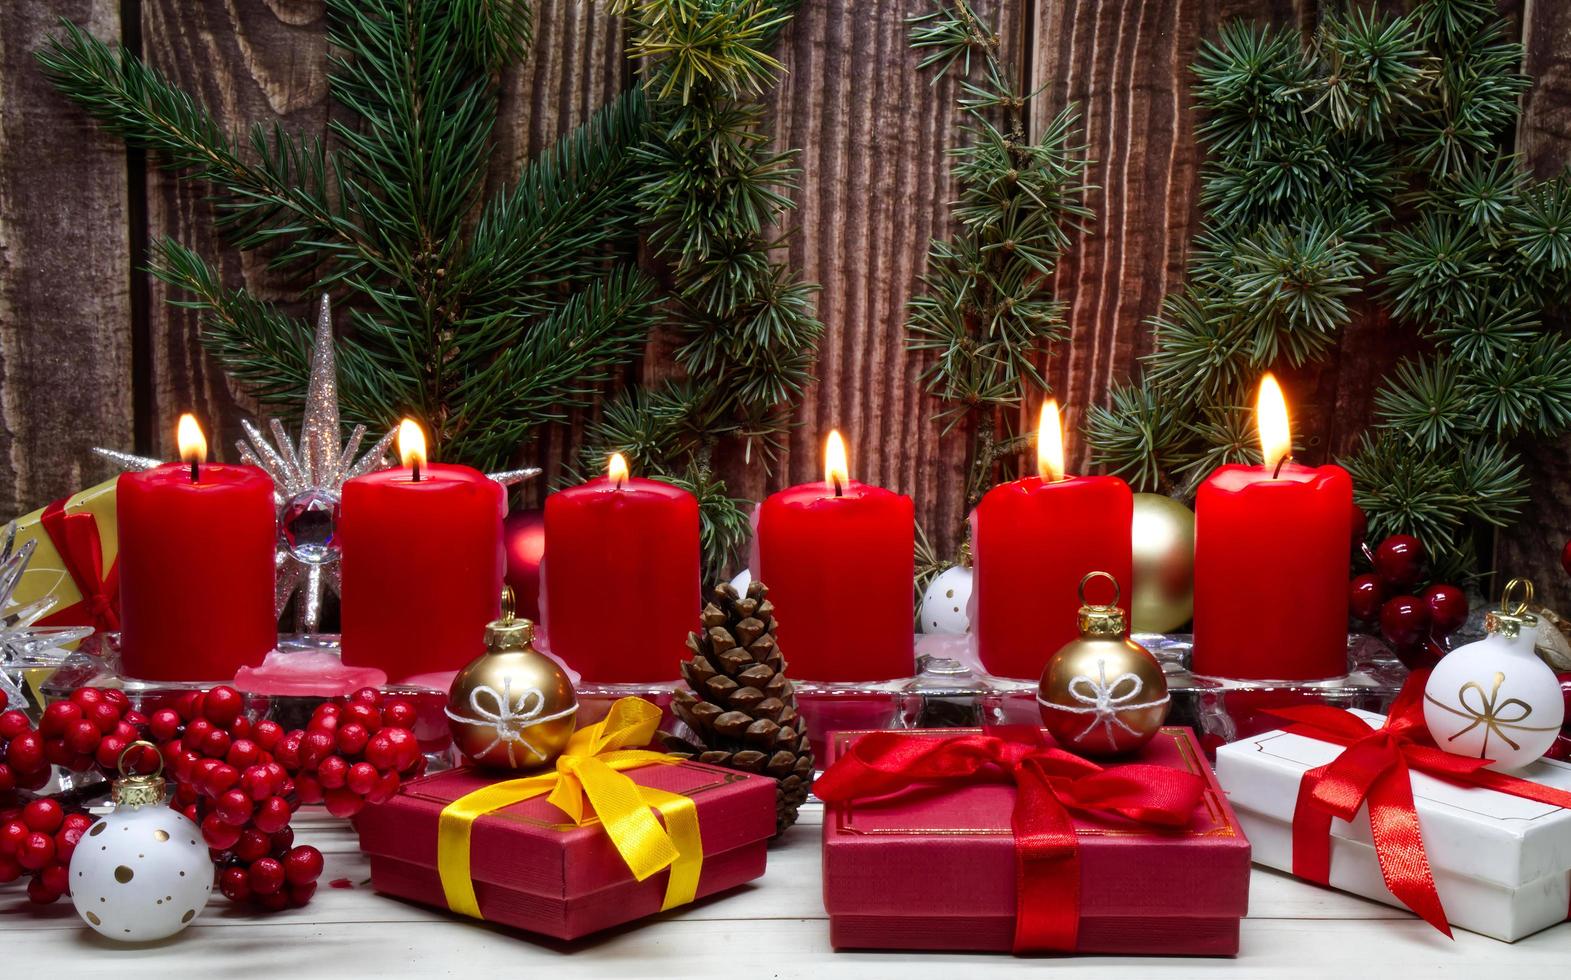 Red Christmas candles and Christmas gift boxes against wooden background photo